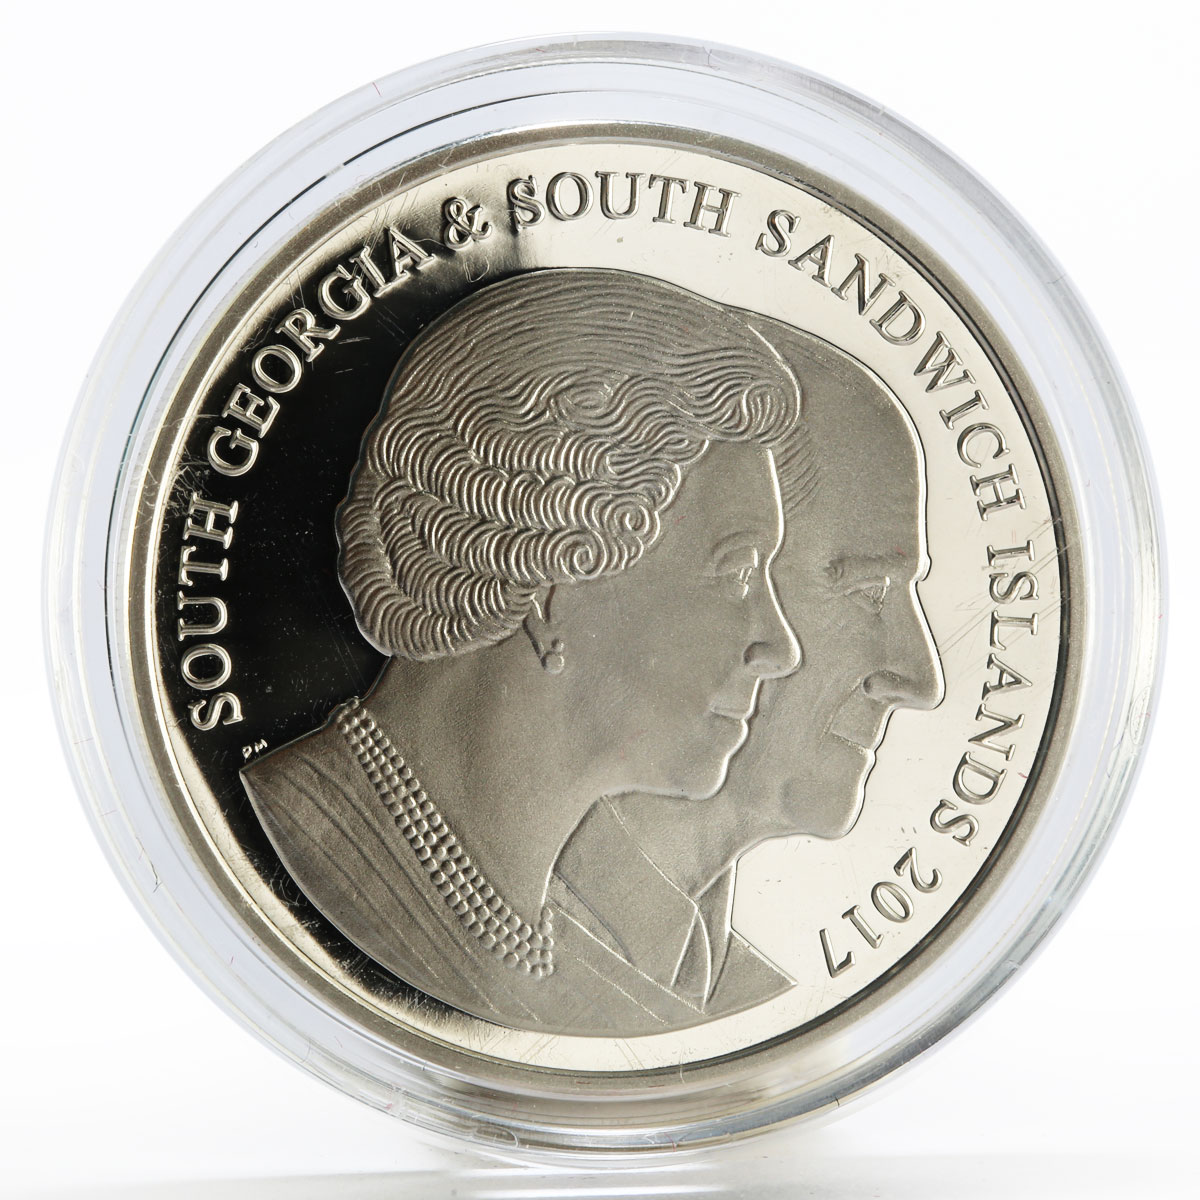 Sandwich Islands 2 pounds 70 Years of Marriage of Elizabeth II silver coin 2017